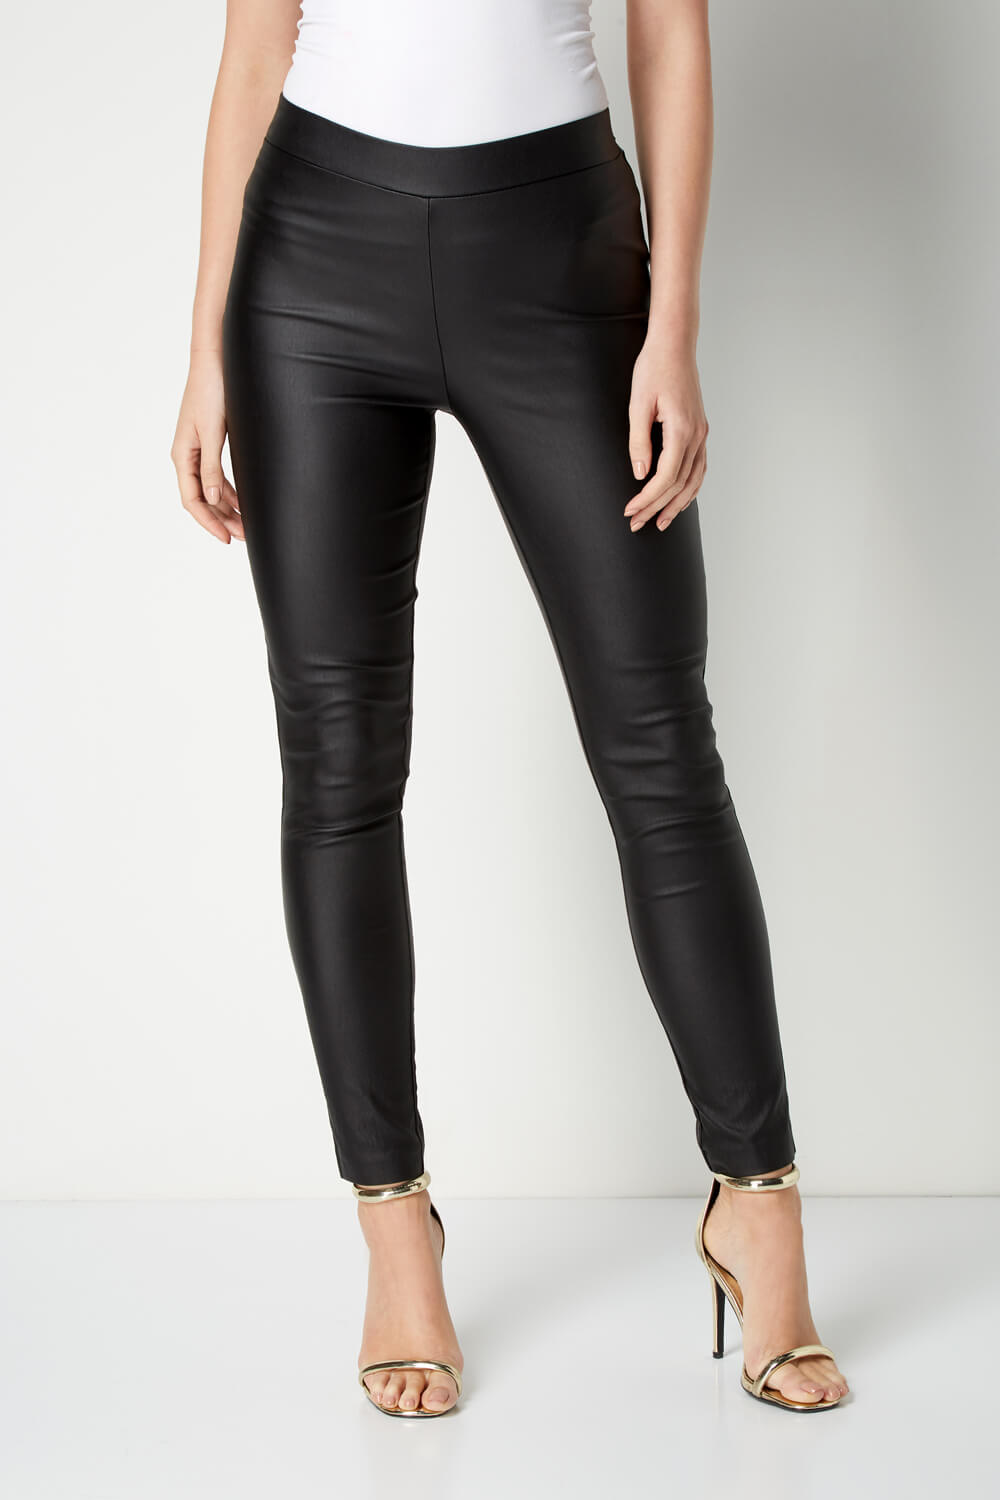 black leather trouser